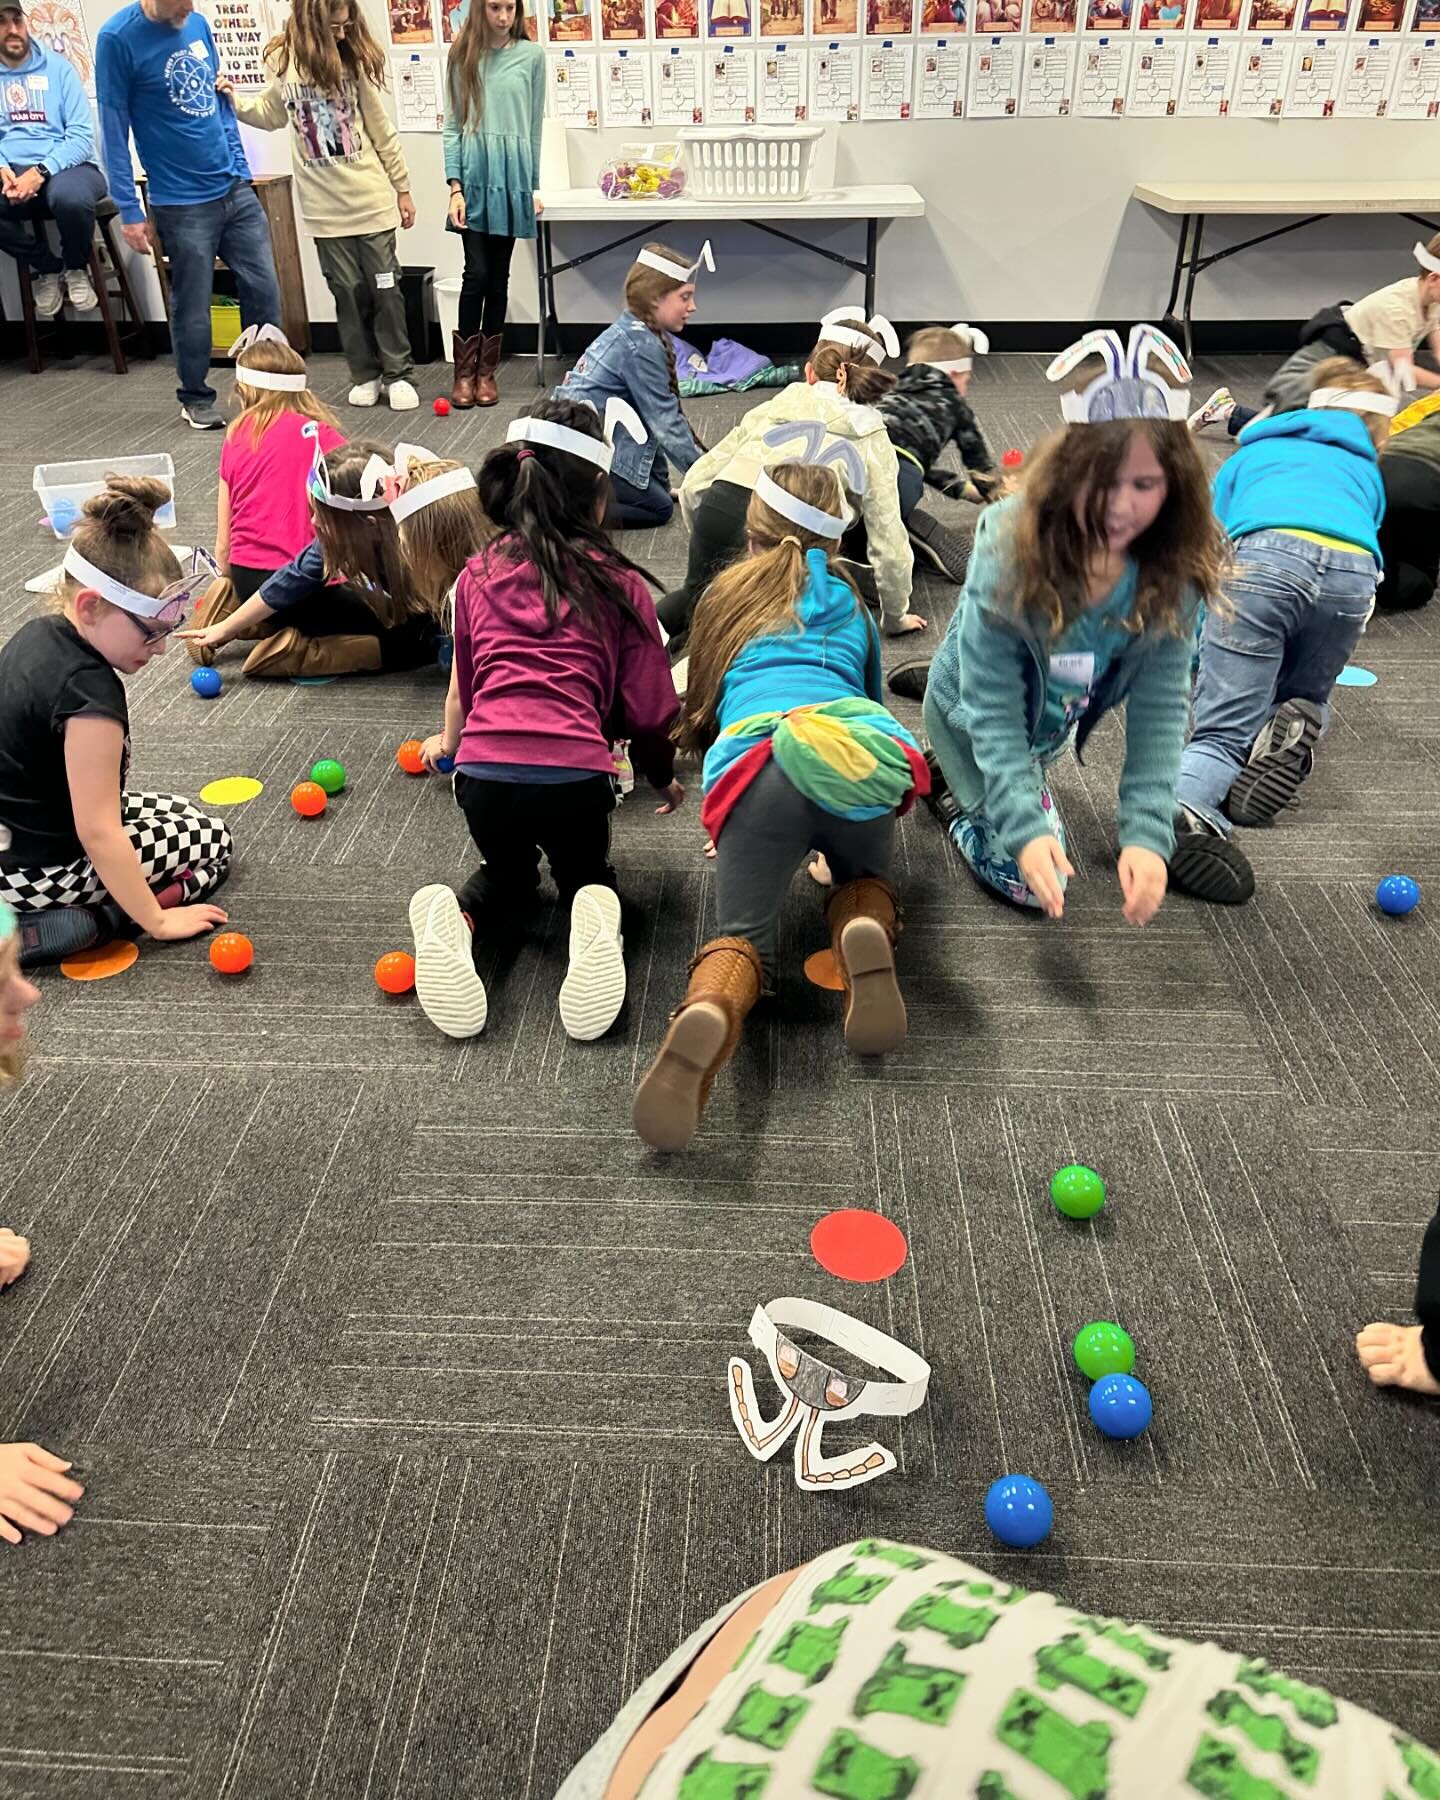 All month long our VKids K-5 have been learning about PETs and the responsibilities that go along with having a pet. We have played lots of fun games and learned our memory verse Luke 16:10a! This week we were ants! Working hard collecting food! If y